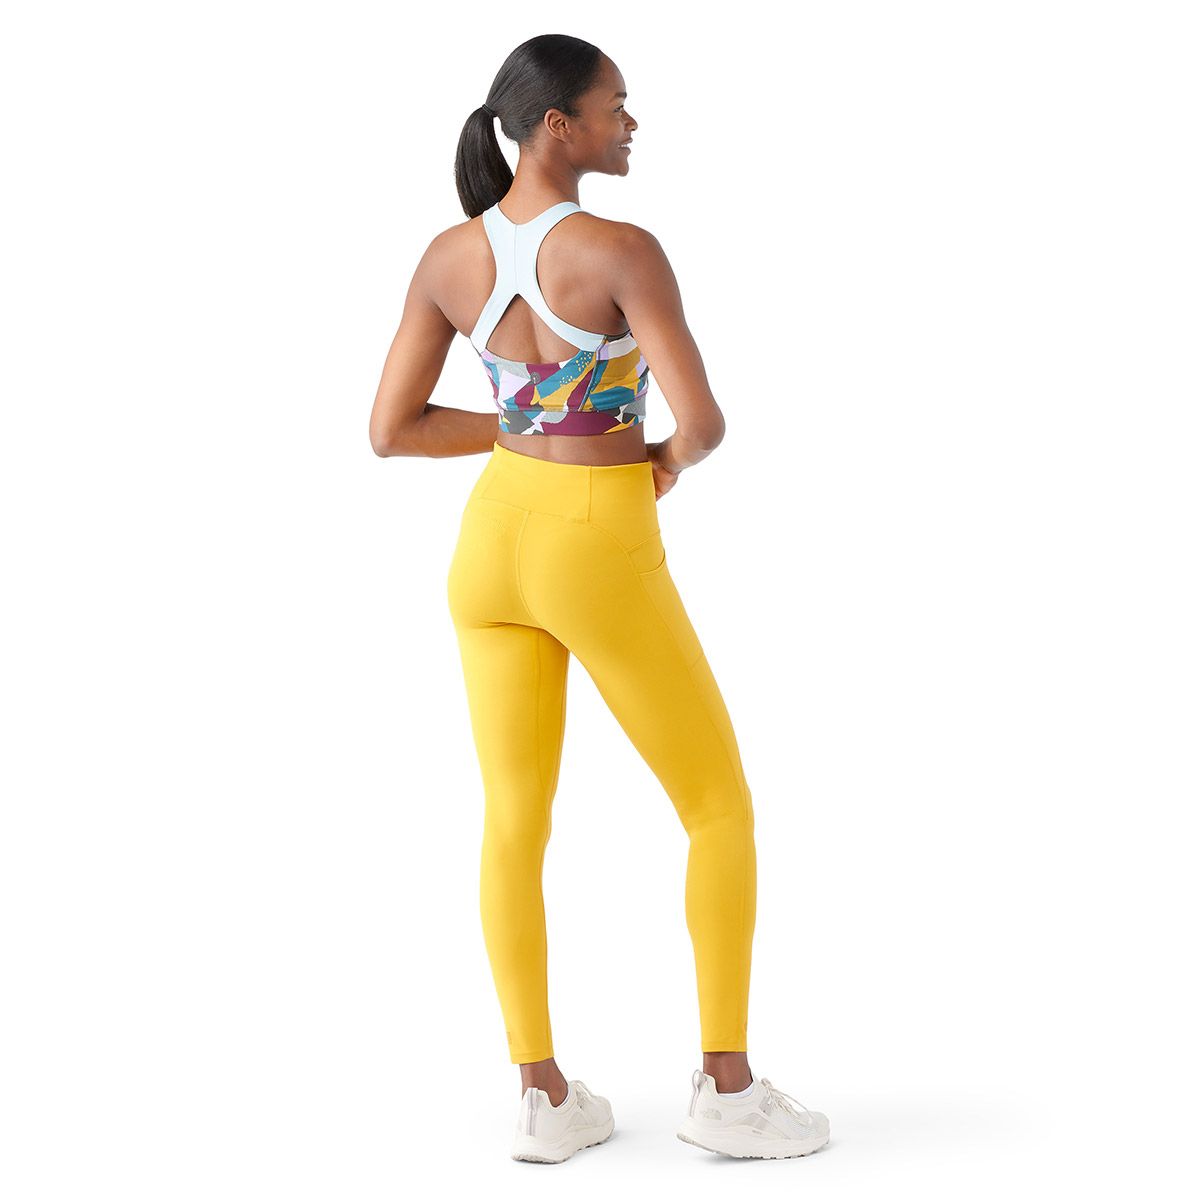 Women's Active Athletic Leggings. (6 Pack) - 4 Elastic Waistband - Mesh  Like Details for Extra Breathability - 6 Sets Per Pack - Sizes: 1-S / 2-M /  2-L / 1-XL - 92% Polyester / 8% Spandex, 7309486